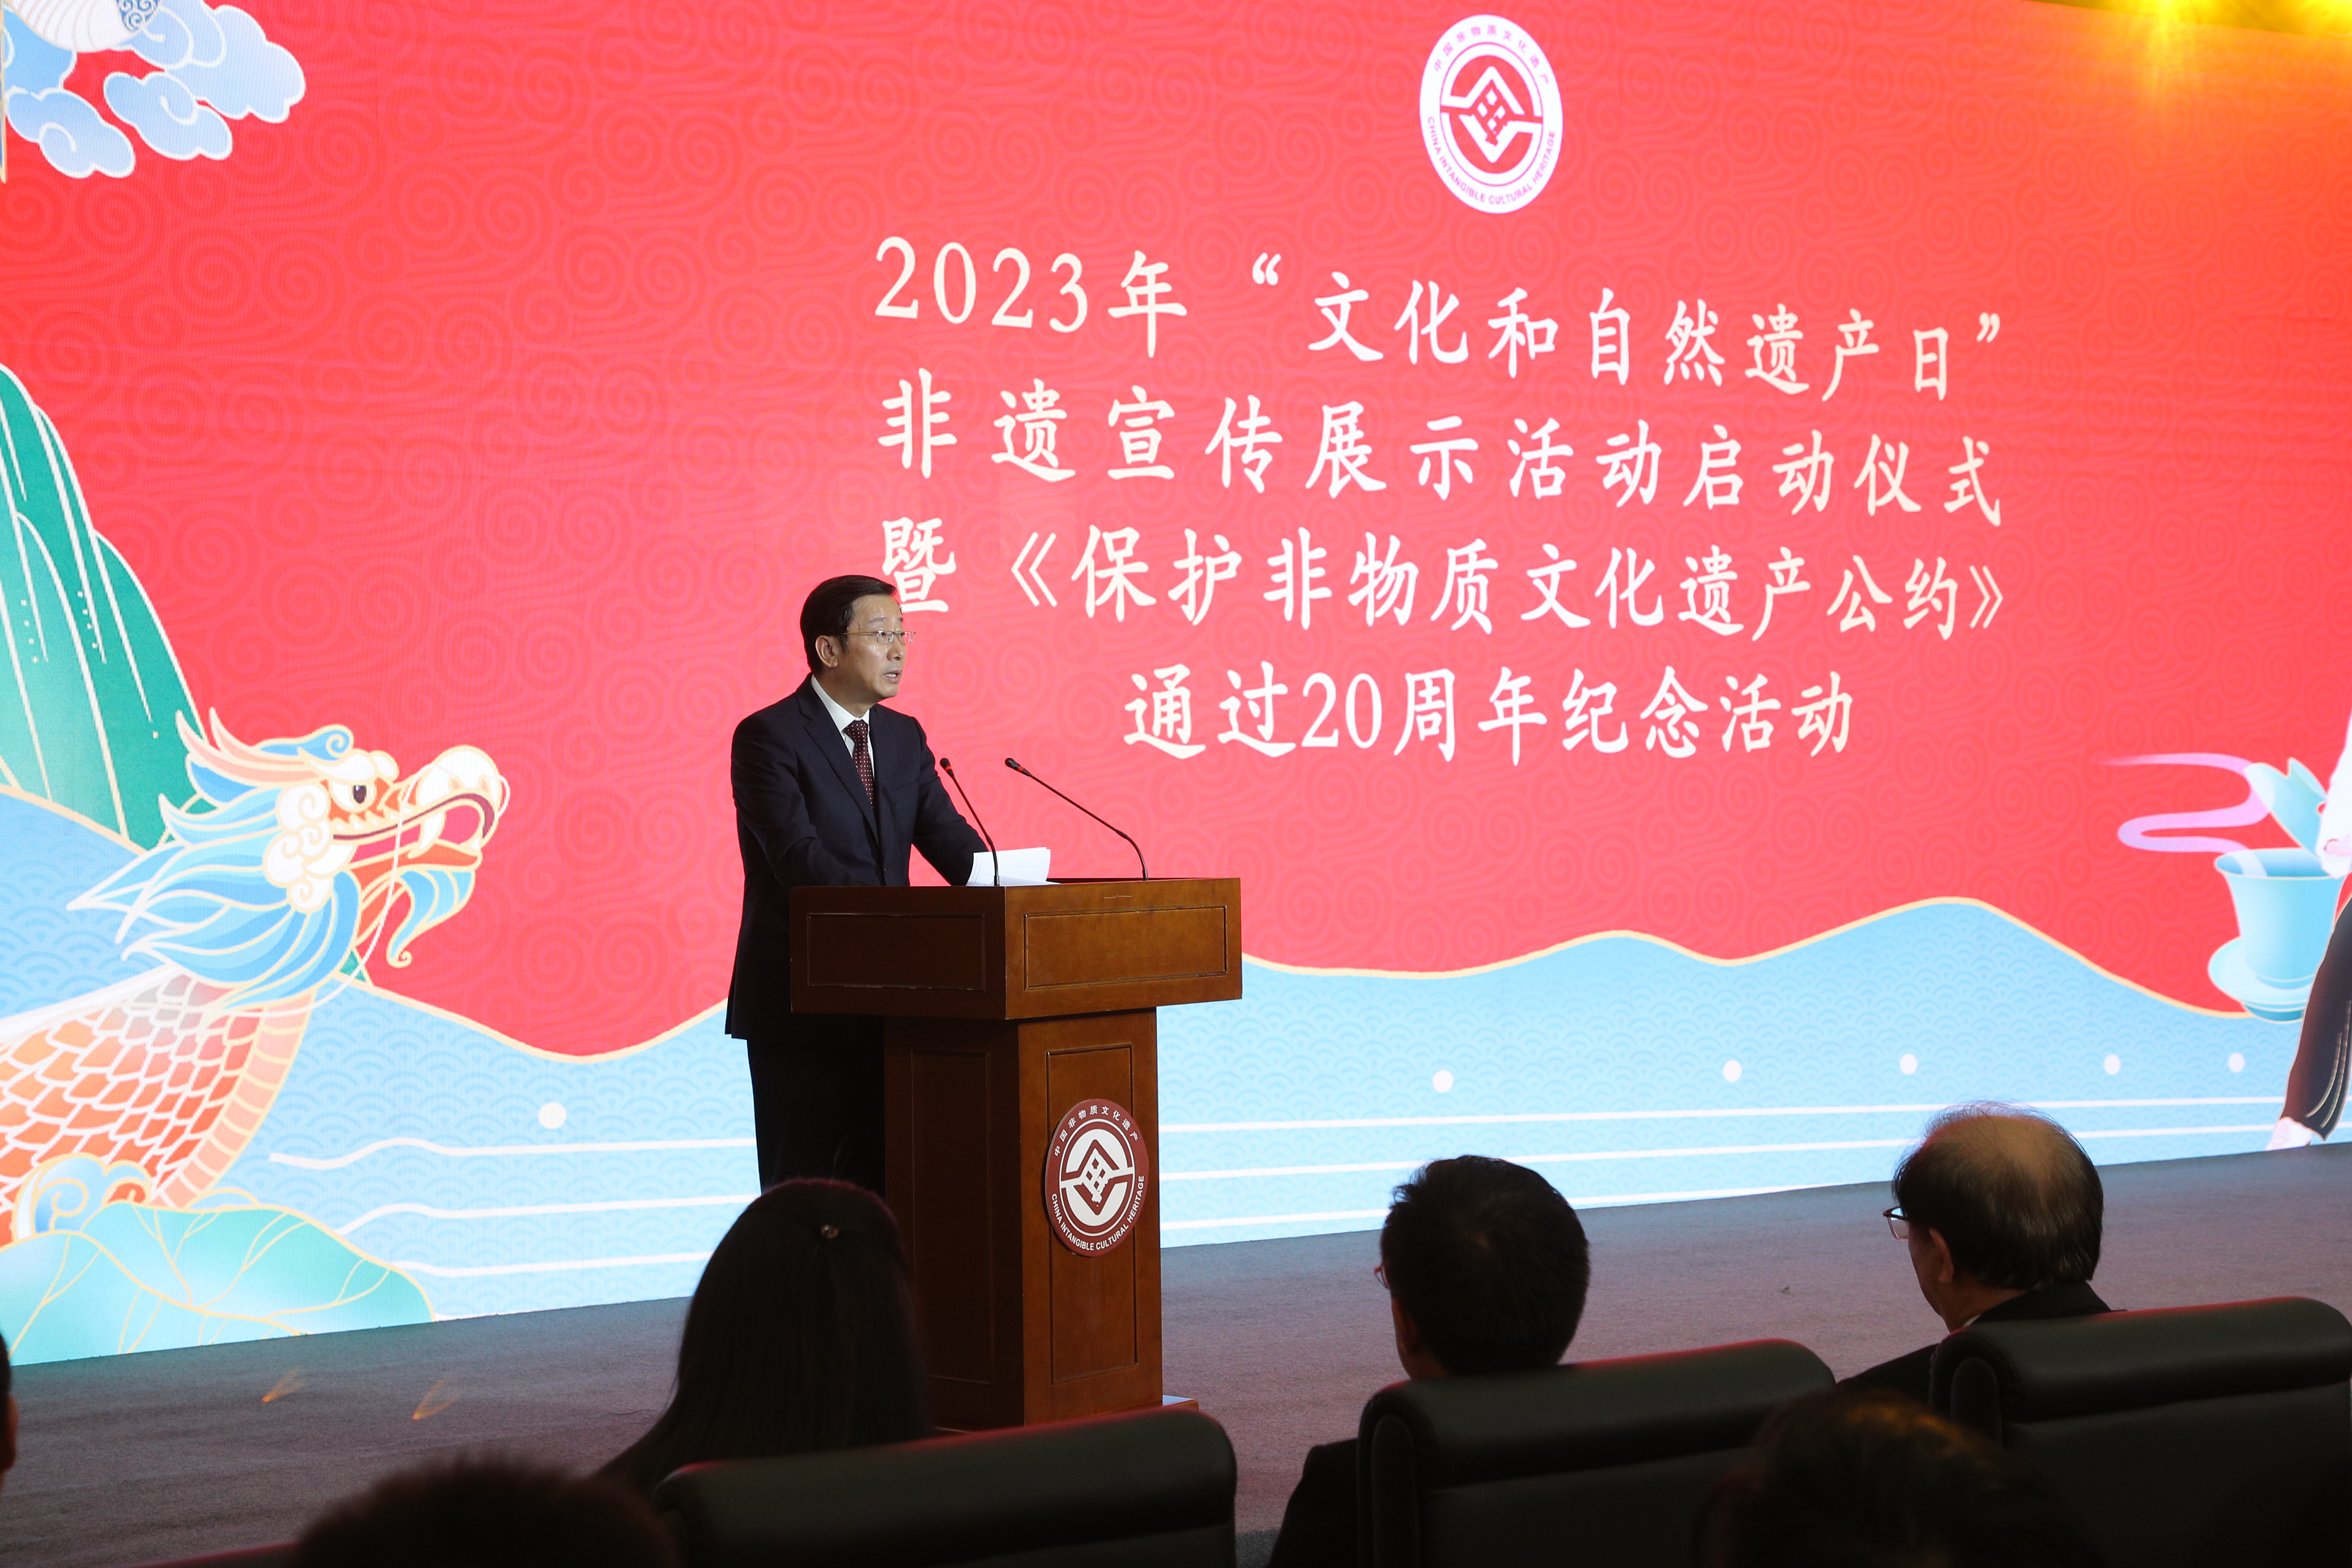 Launching ceremony of 2023 Cultural and Natural Heritage Day  Promotional Events on Intangible Cultural Herilage and Celebrations of the 20th Anniversary of the Convention for the Safeguarding of the lntanaible Cultural Heritage 